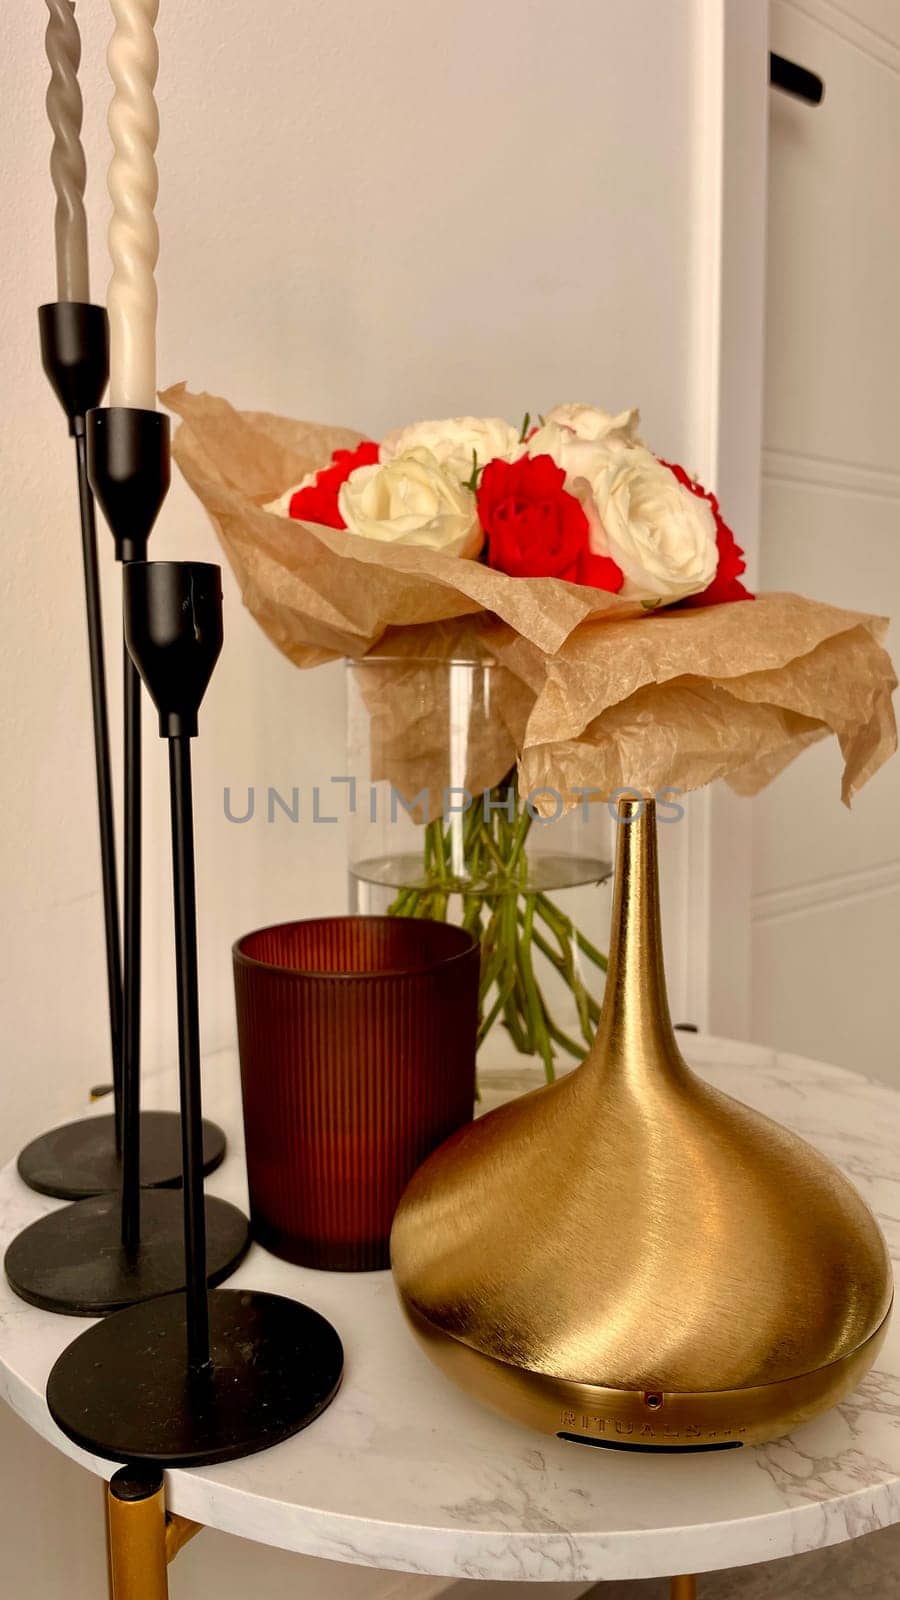 There are candlesticks, an aroma lamp, a candle and a bouquet of roses on a round table. High quality photo